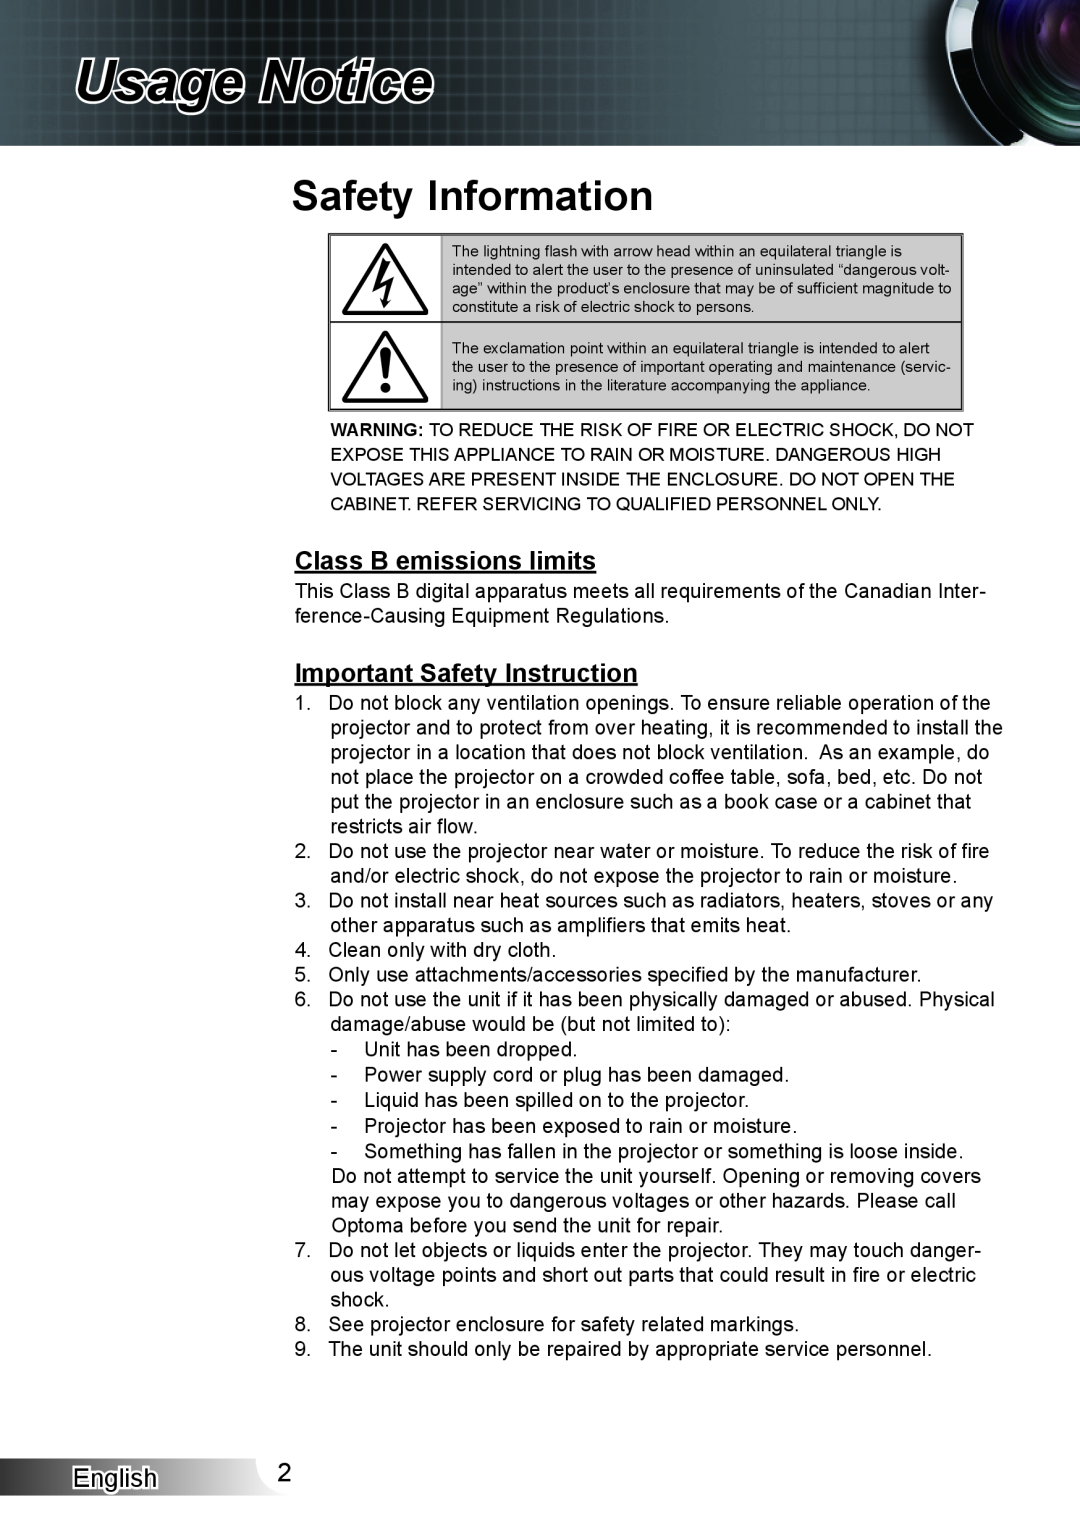 Optoma Technology HD33 manual Usage Notice, Safety Information, Class B emissions limits, Important Safety Instruction 